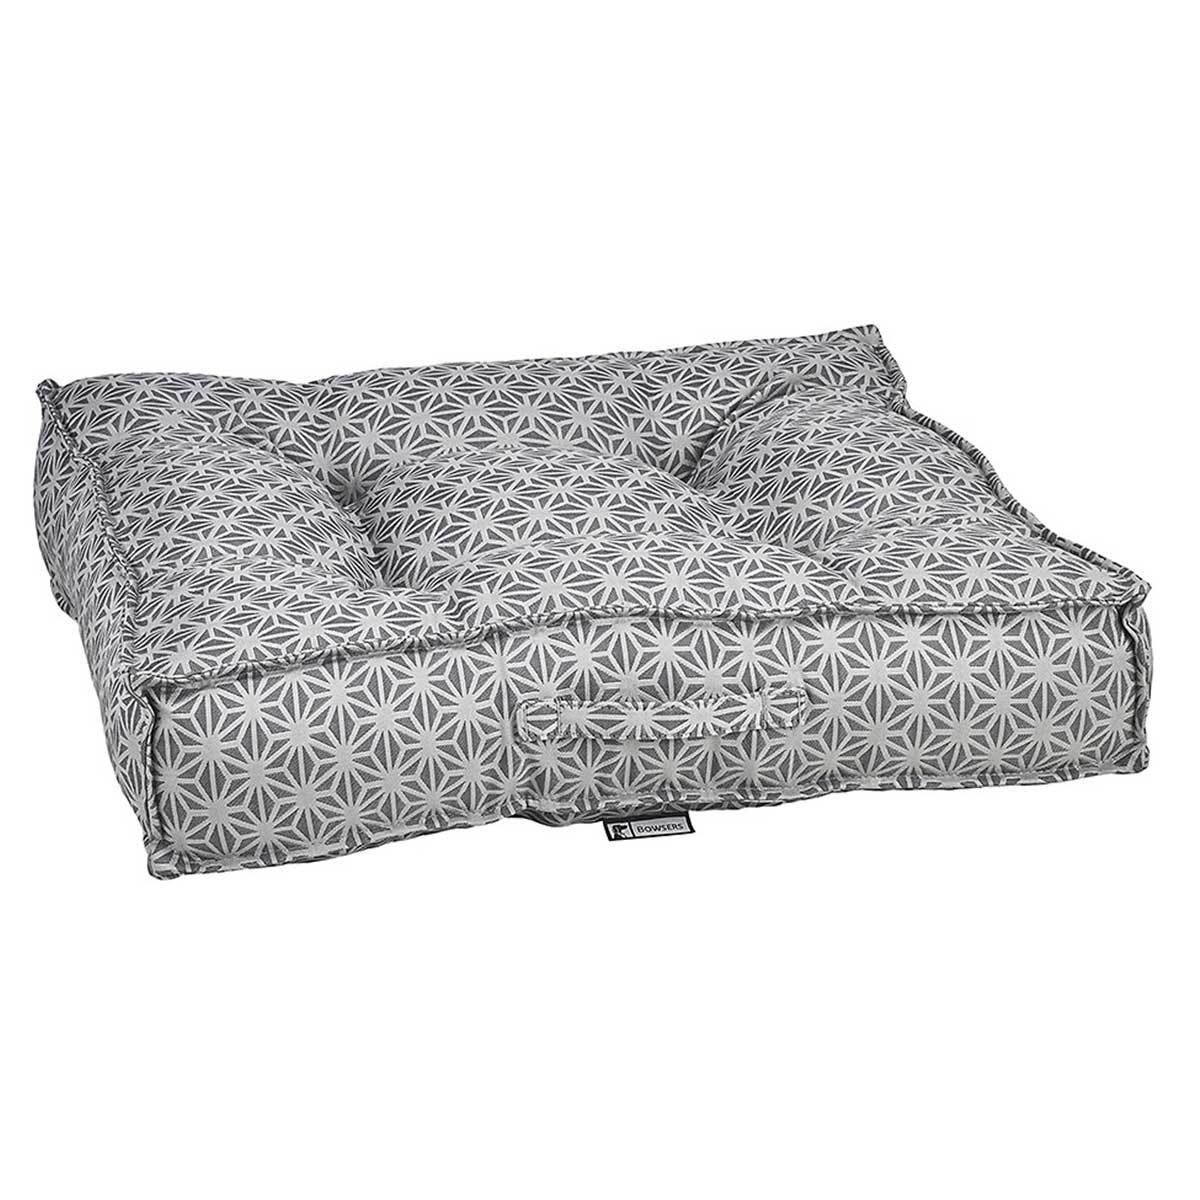 Piazza Square Dog Bed in Mercury | Pawlicious & Company